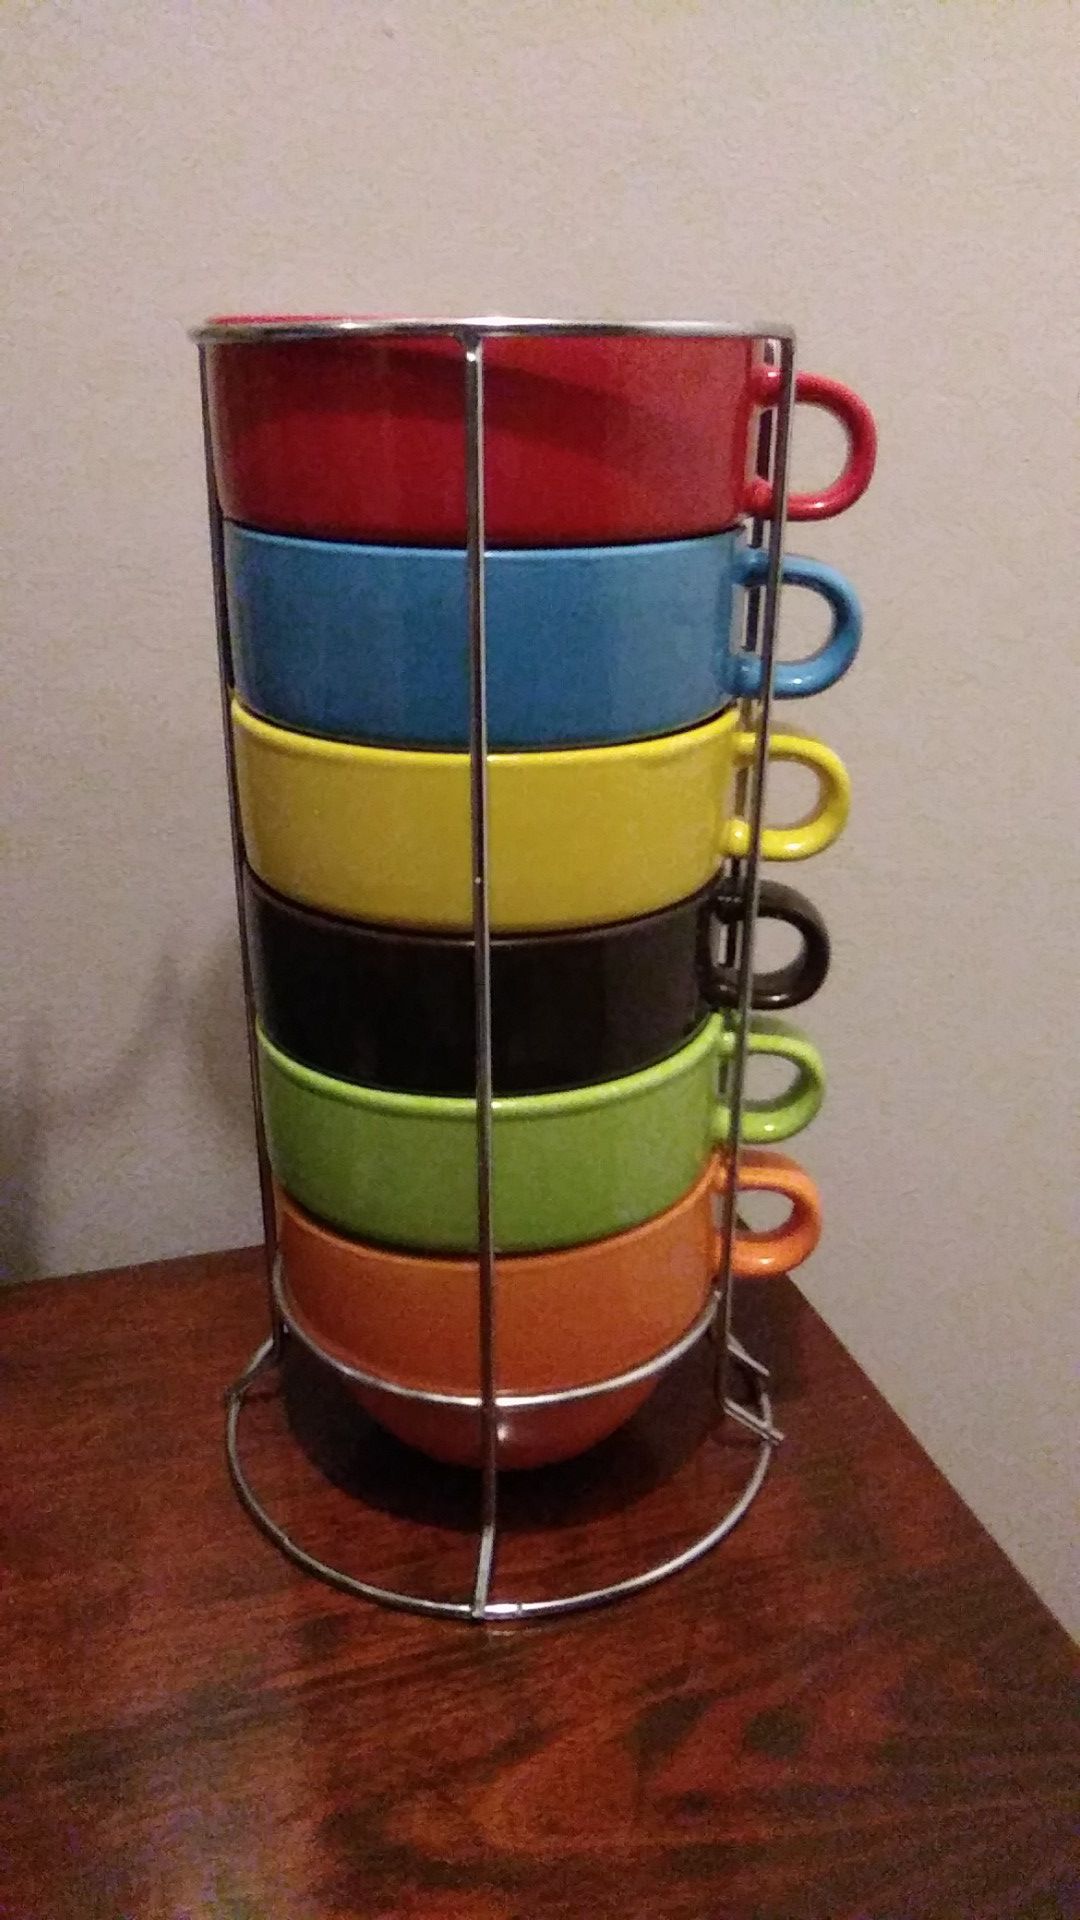 Soup bowls in Multi colours stackable in metal storage